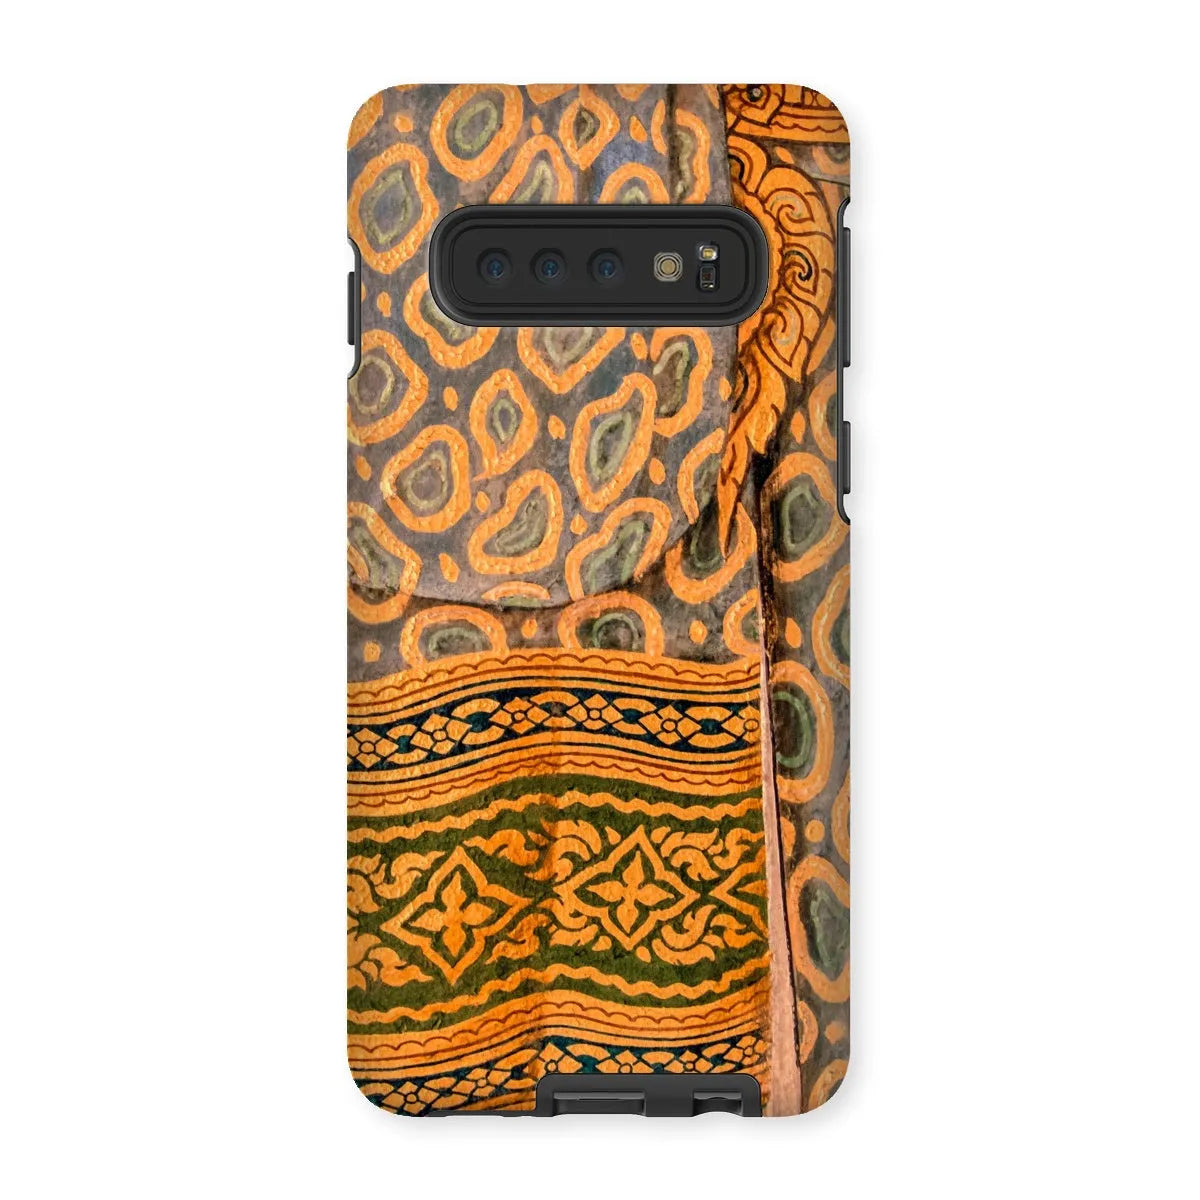 Lady In Waiting - Thai Aesthetic Art Phone Case - Samsung Galaxy S10 / Matte - Mobile Phone Cases - Aesthetic Art